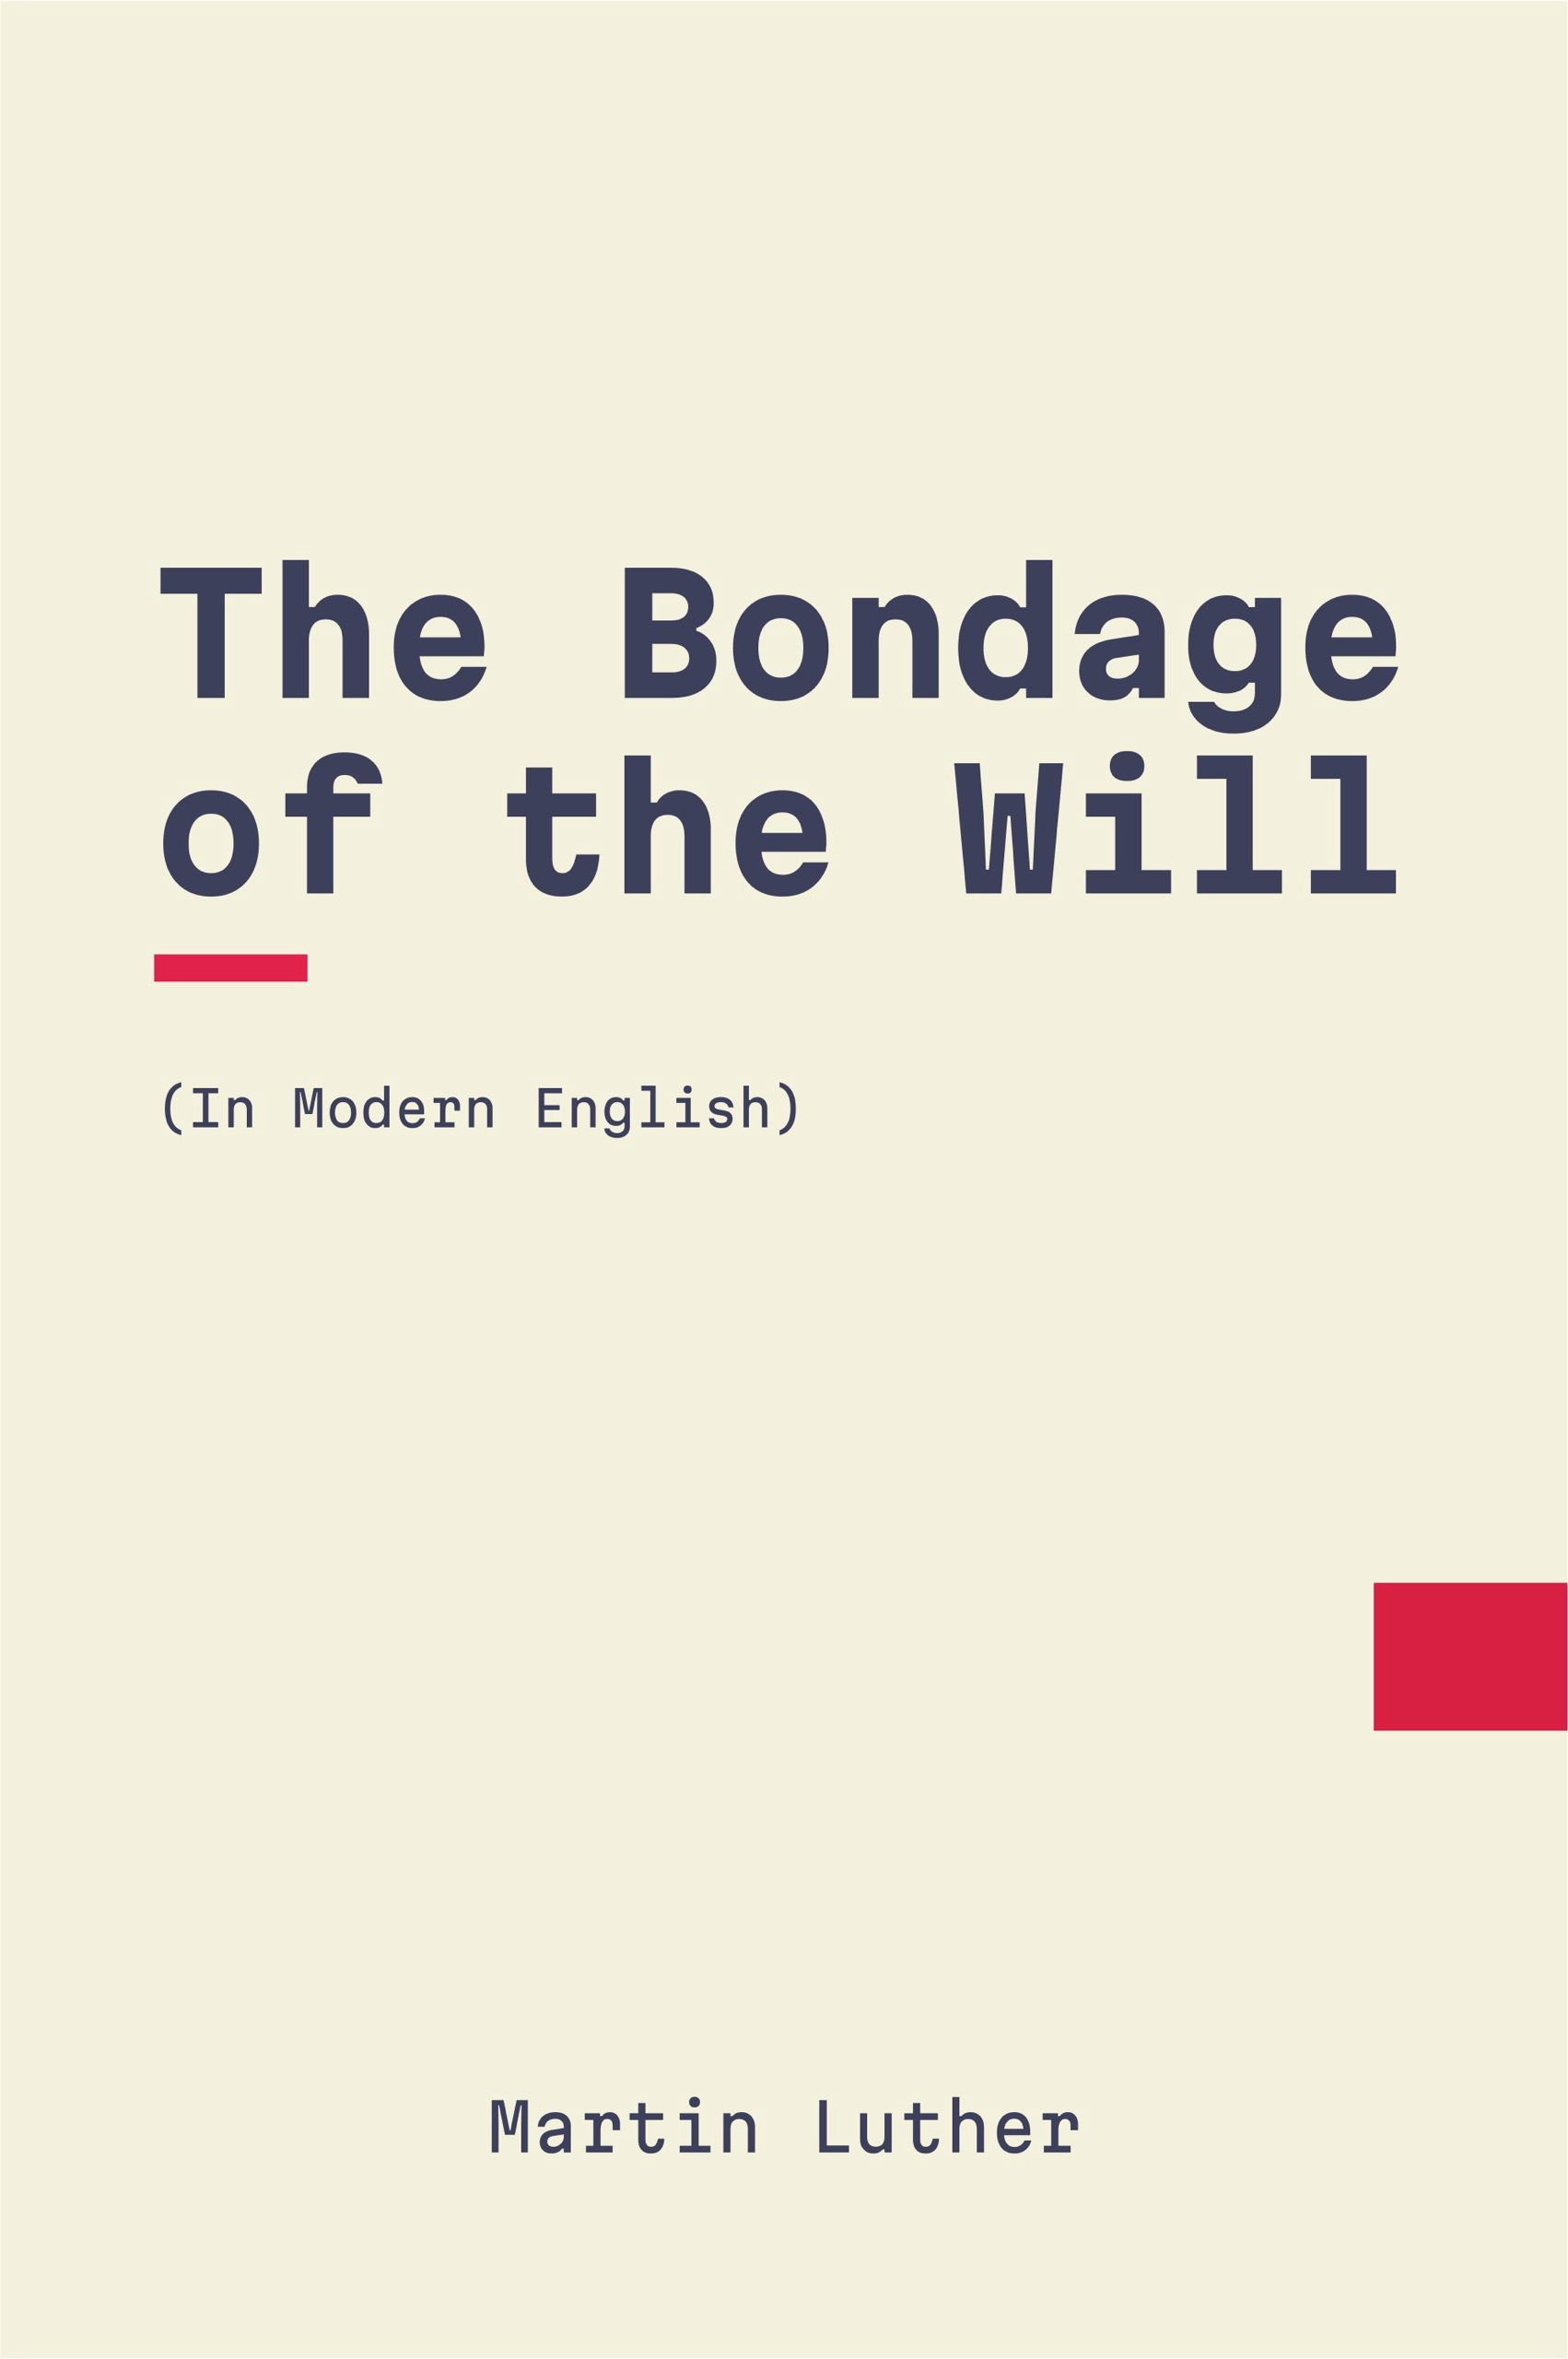 Bondage of the Will by Martin Luther